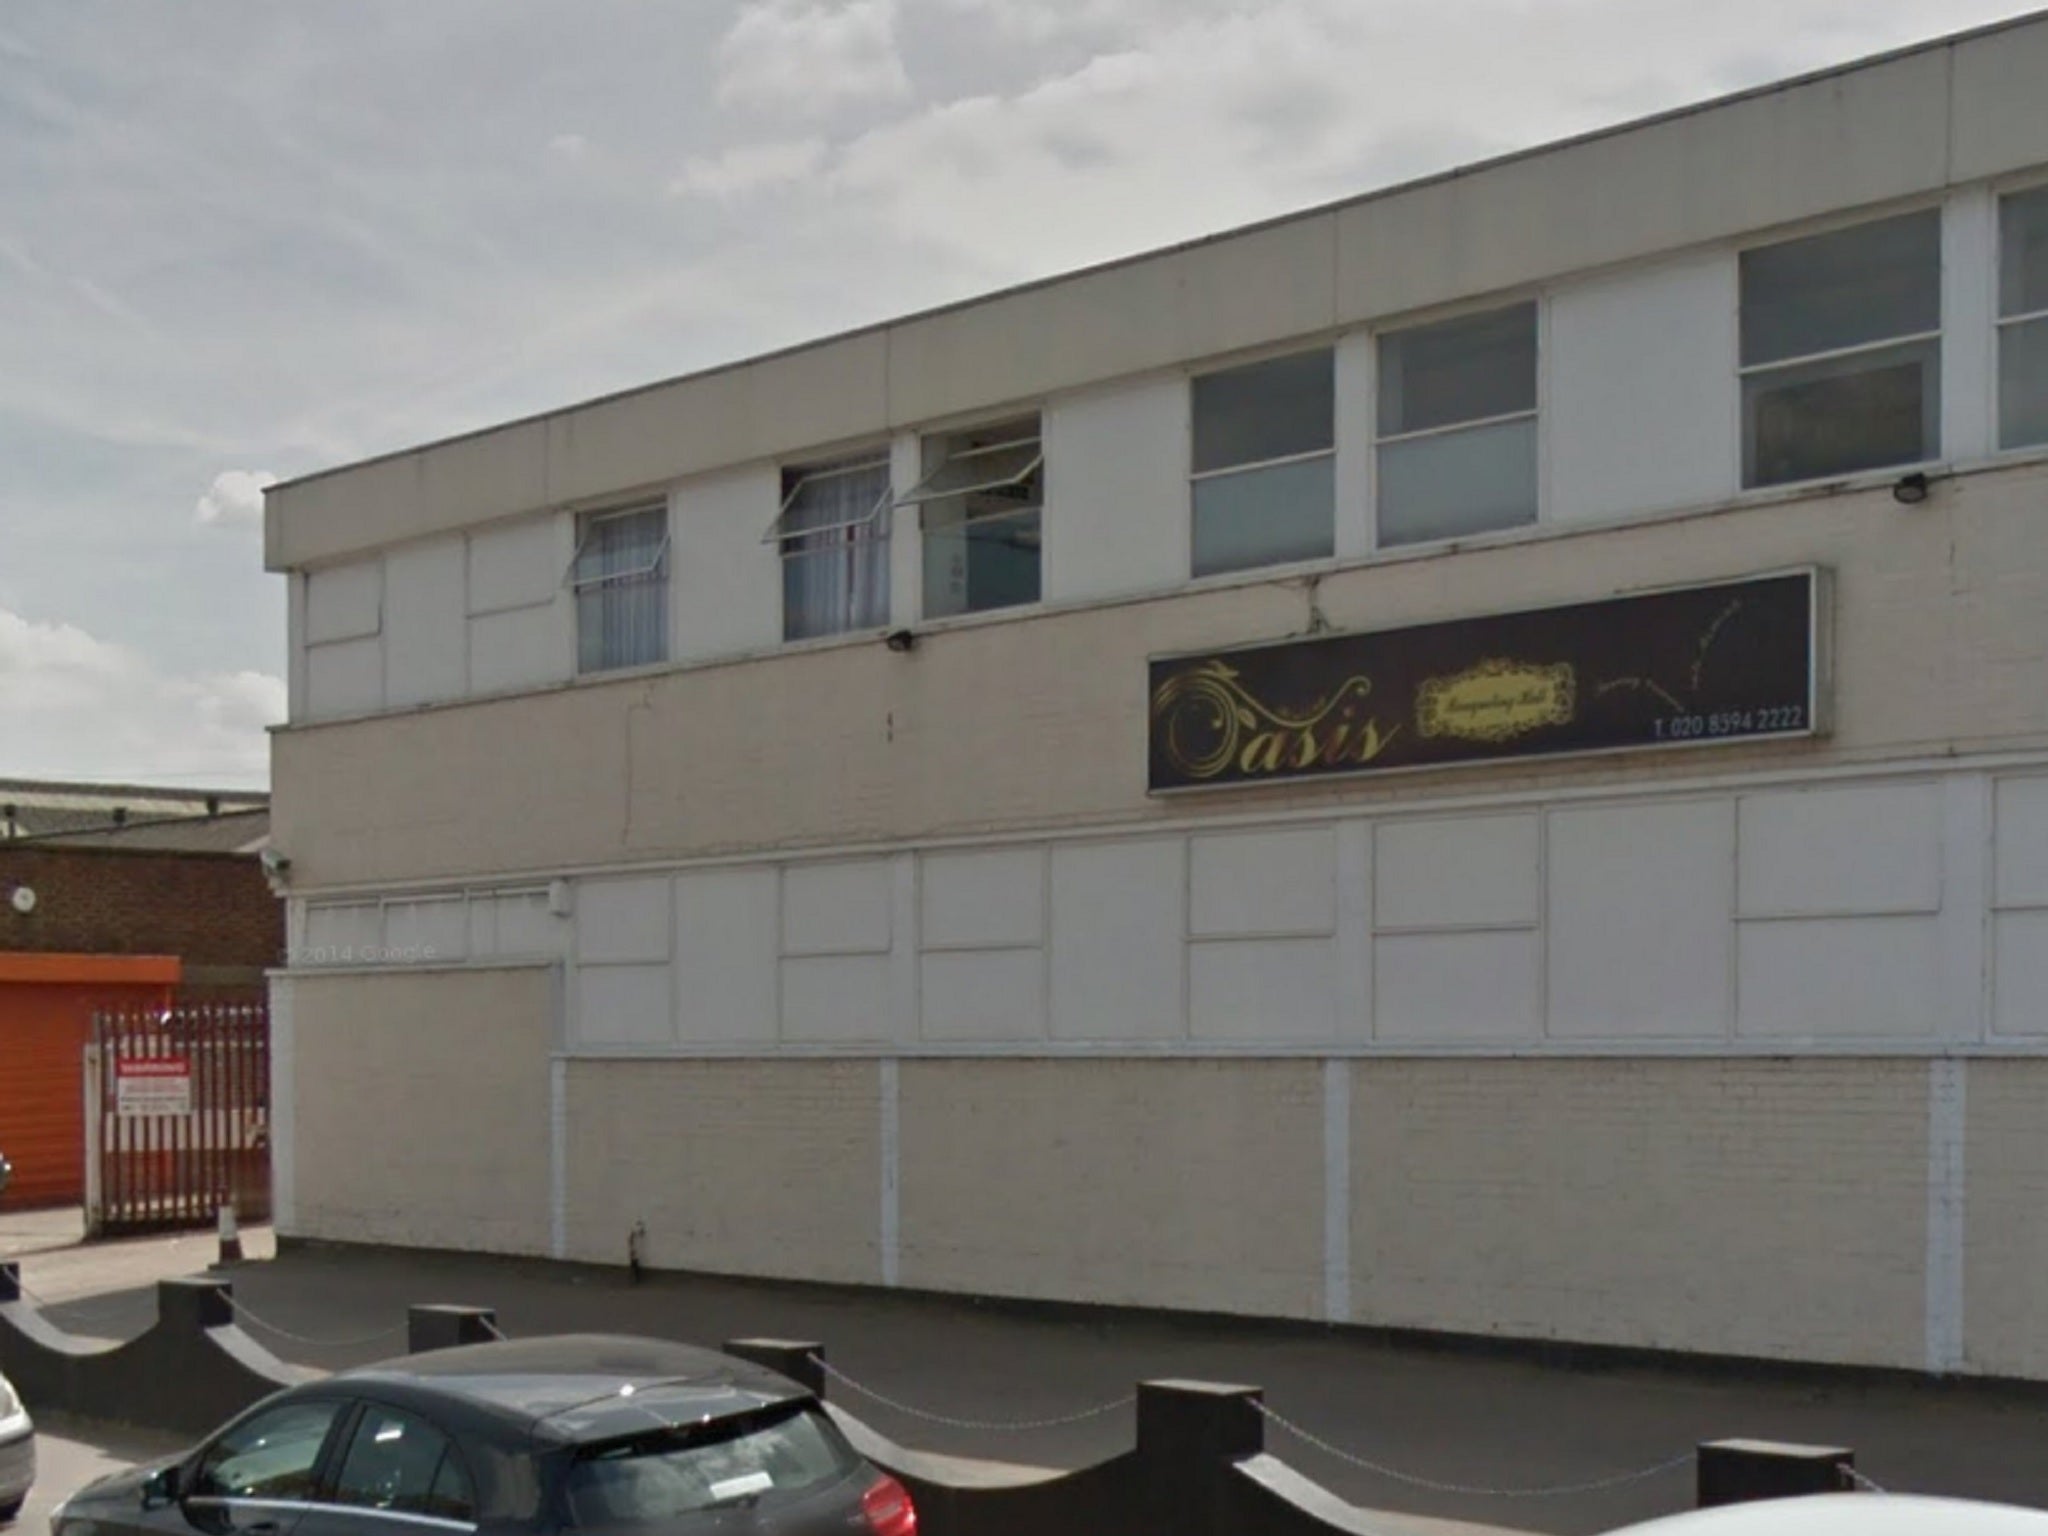 The stabbings occurred during a party at Oasis Banqueting Hall in Barking